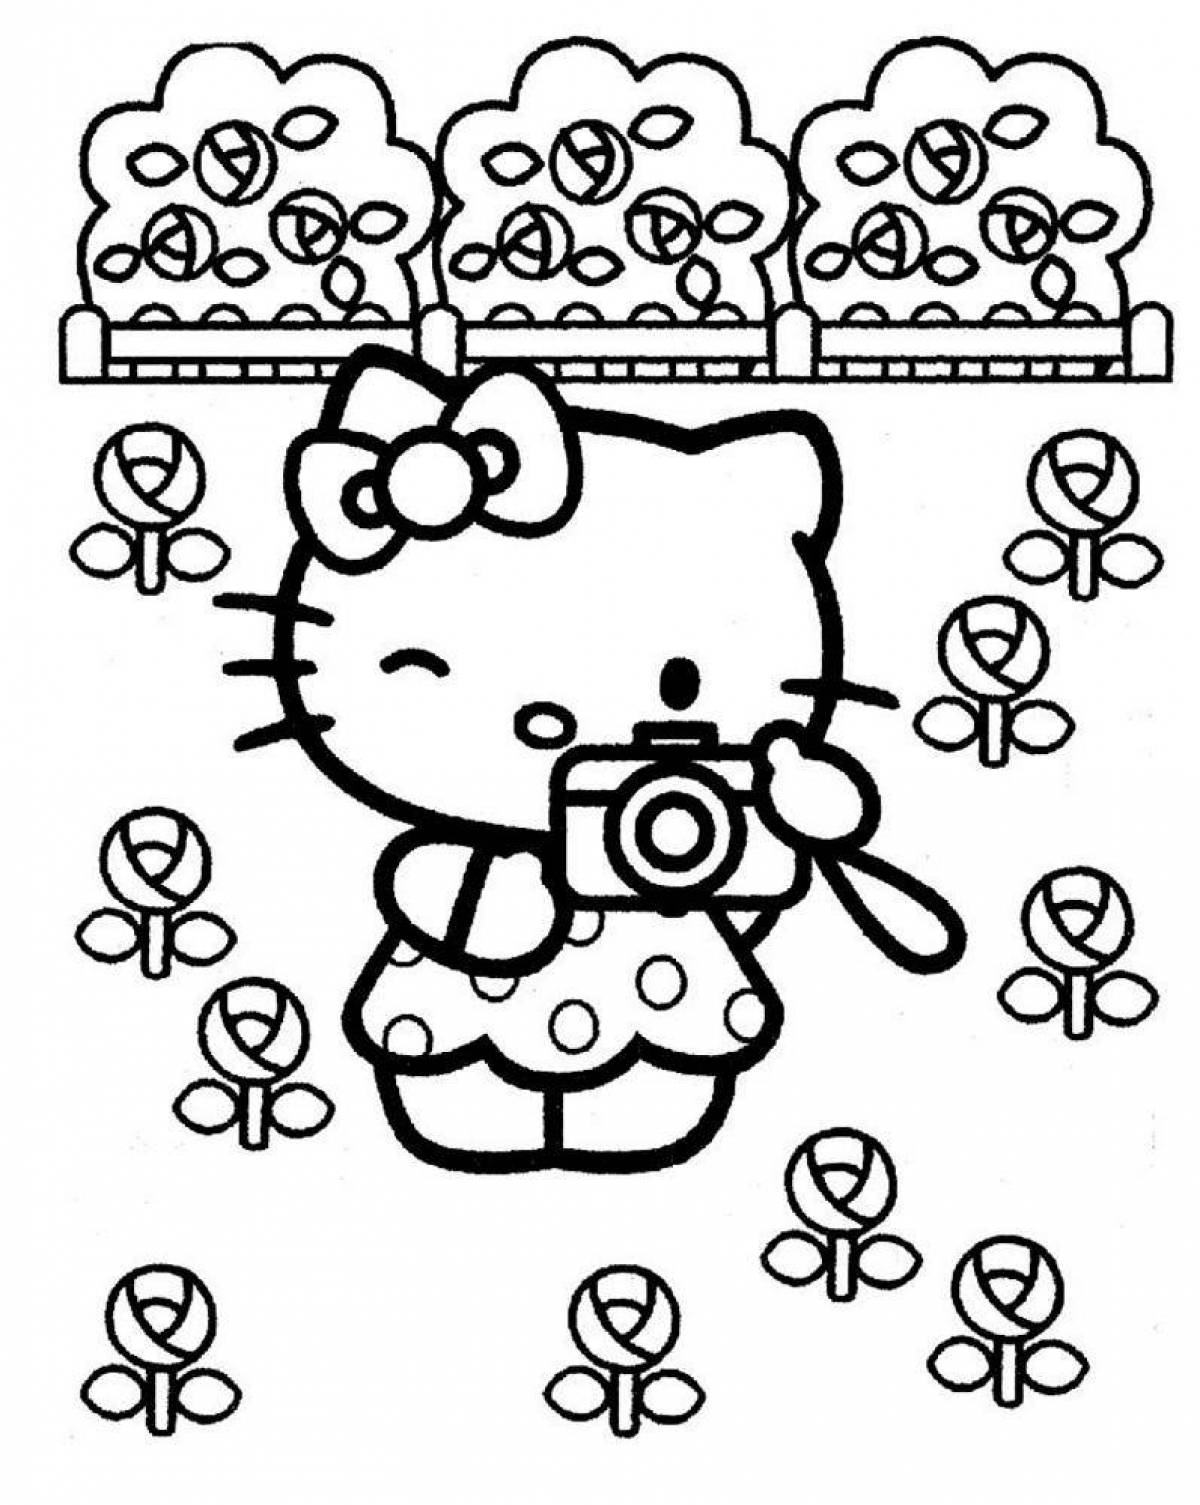 Playful coloring hello kitty with a heart